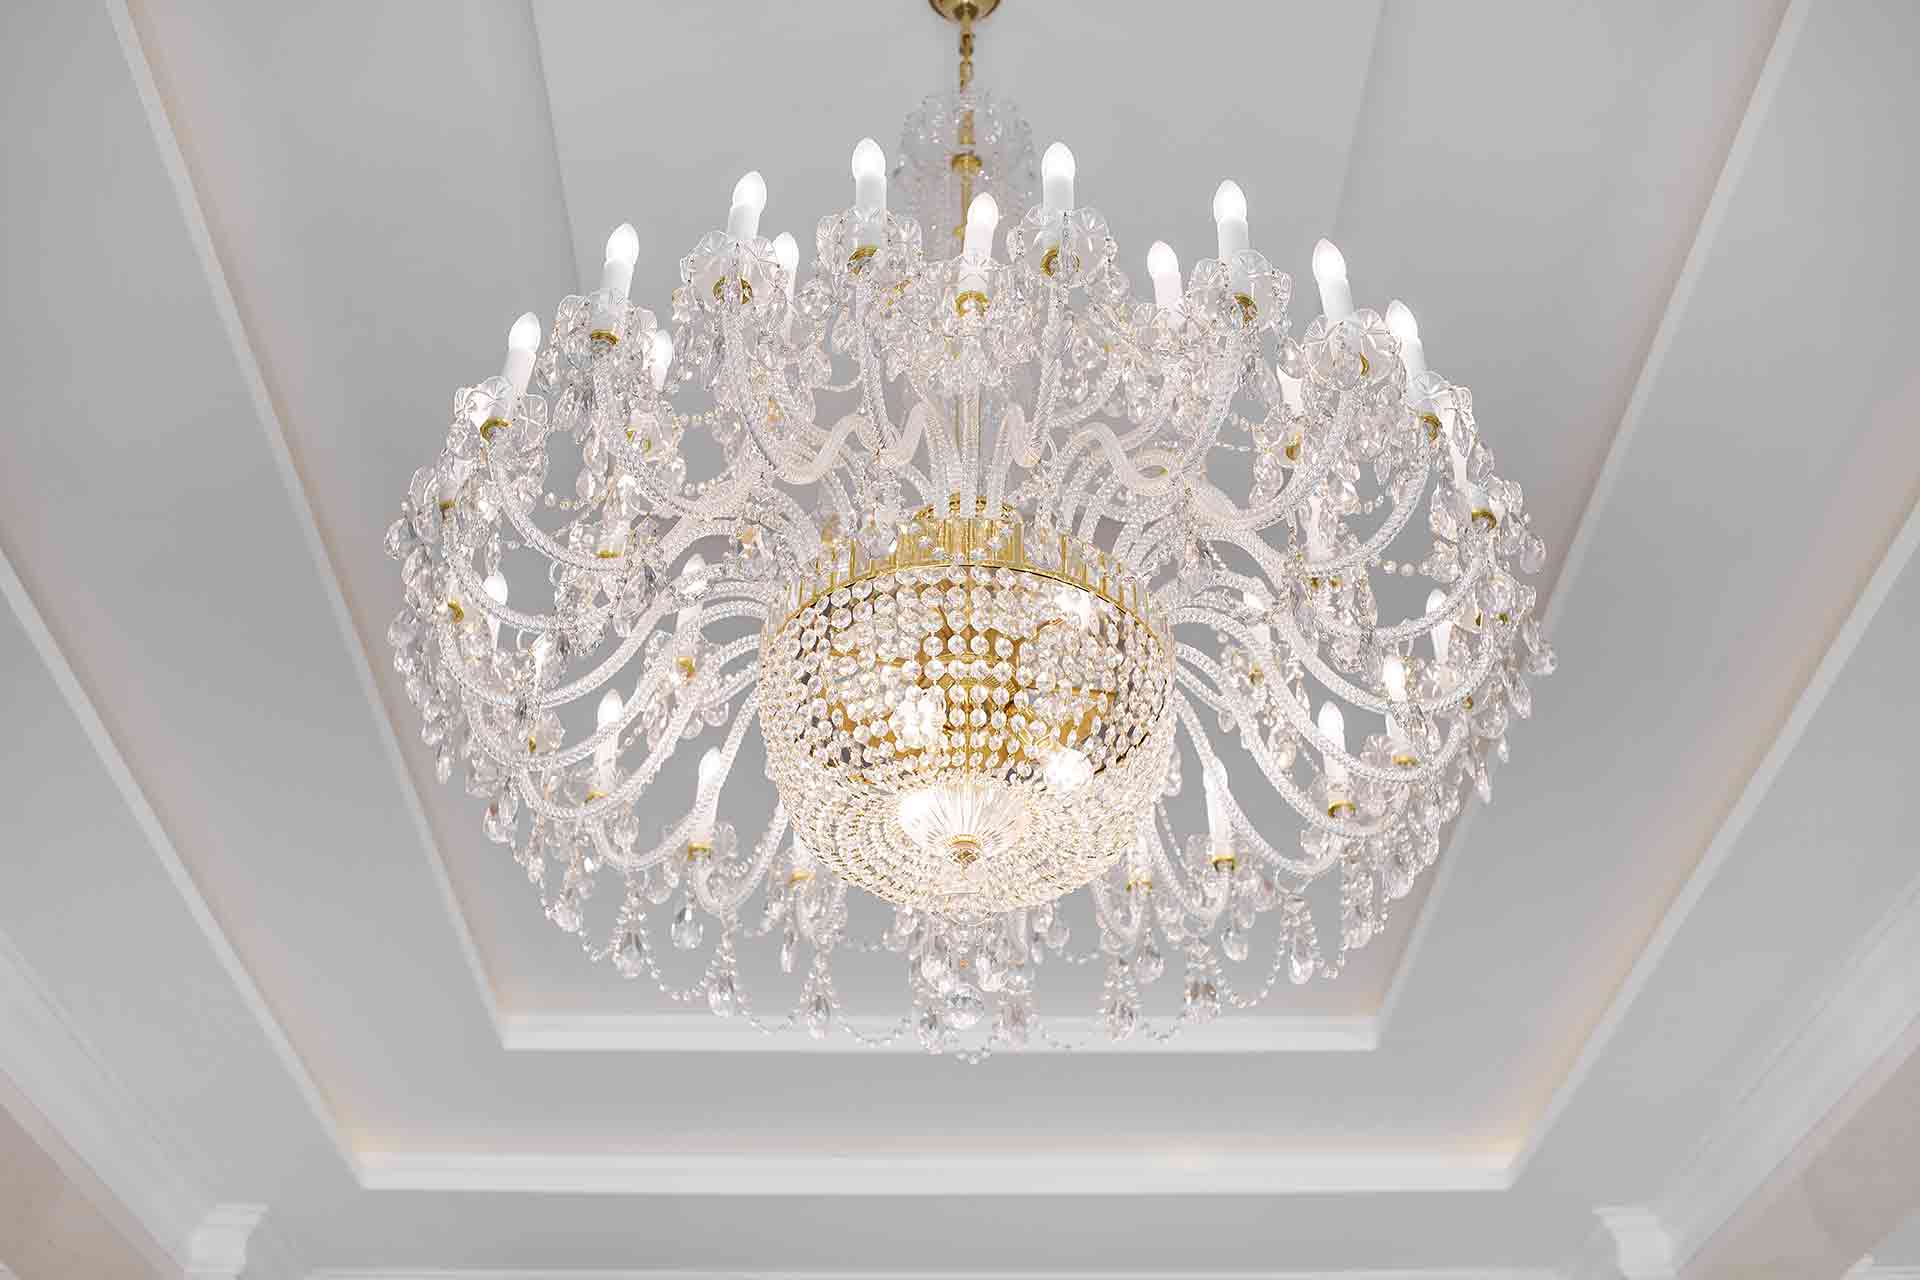 How To Hang A Chandelier From The Ceiling